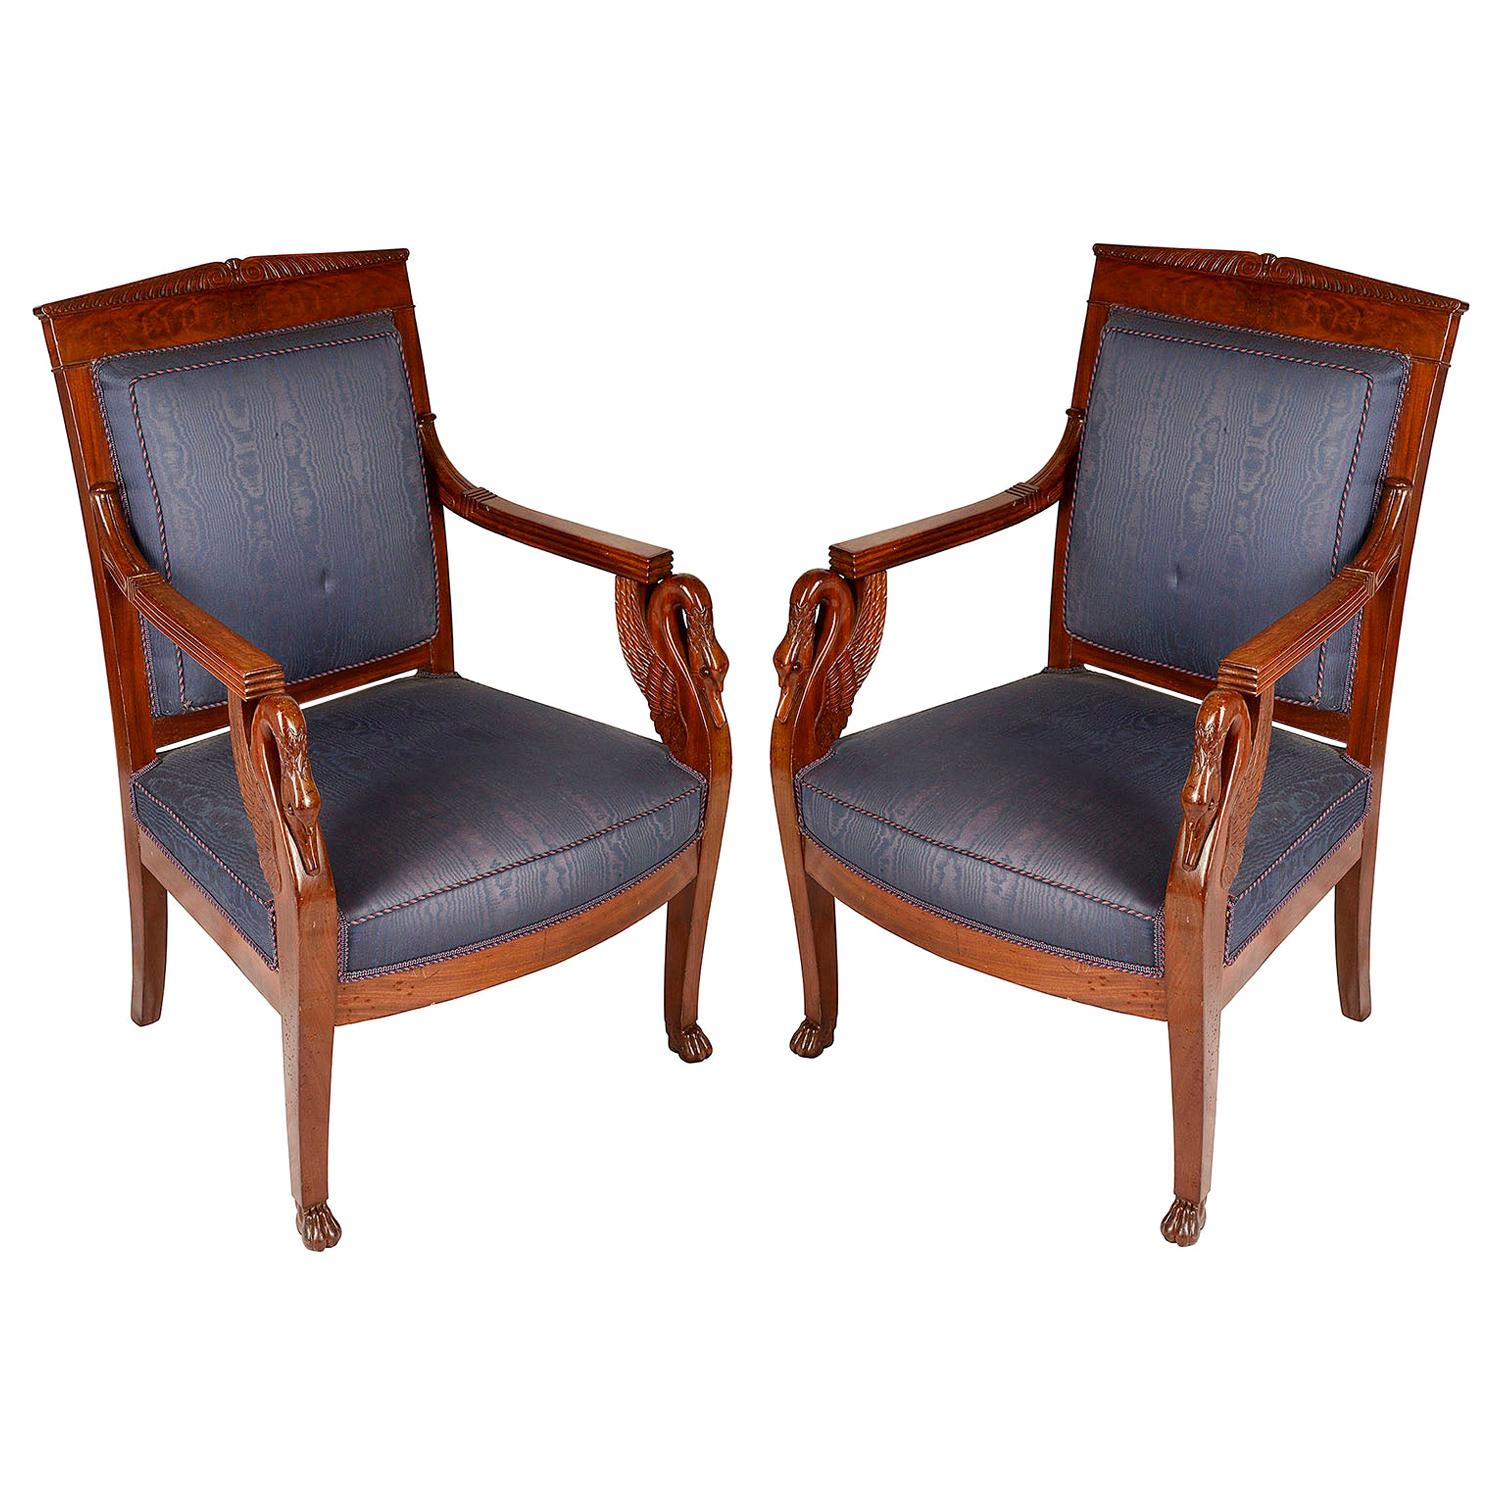 Pair of French Late 19th Century Empire Mahogany Armchairs